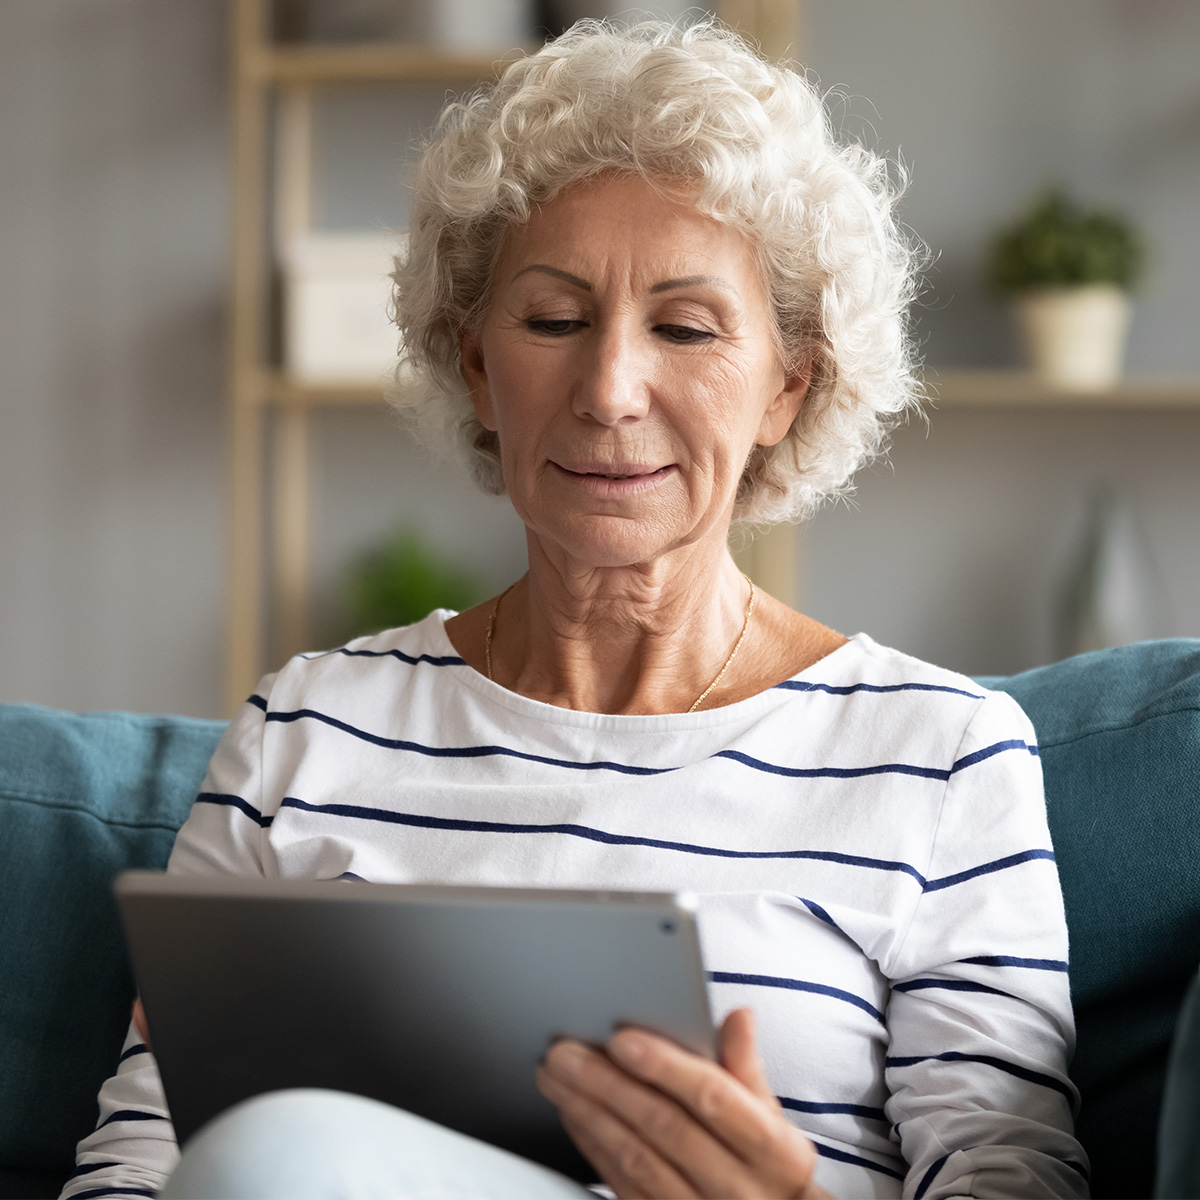 woman sits on couch reading her tablet